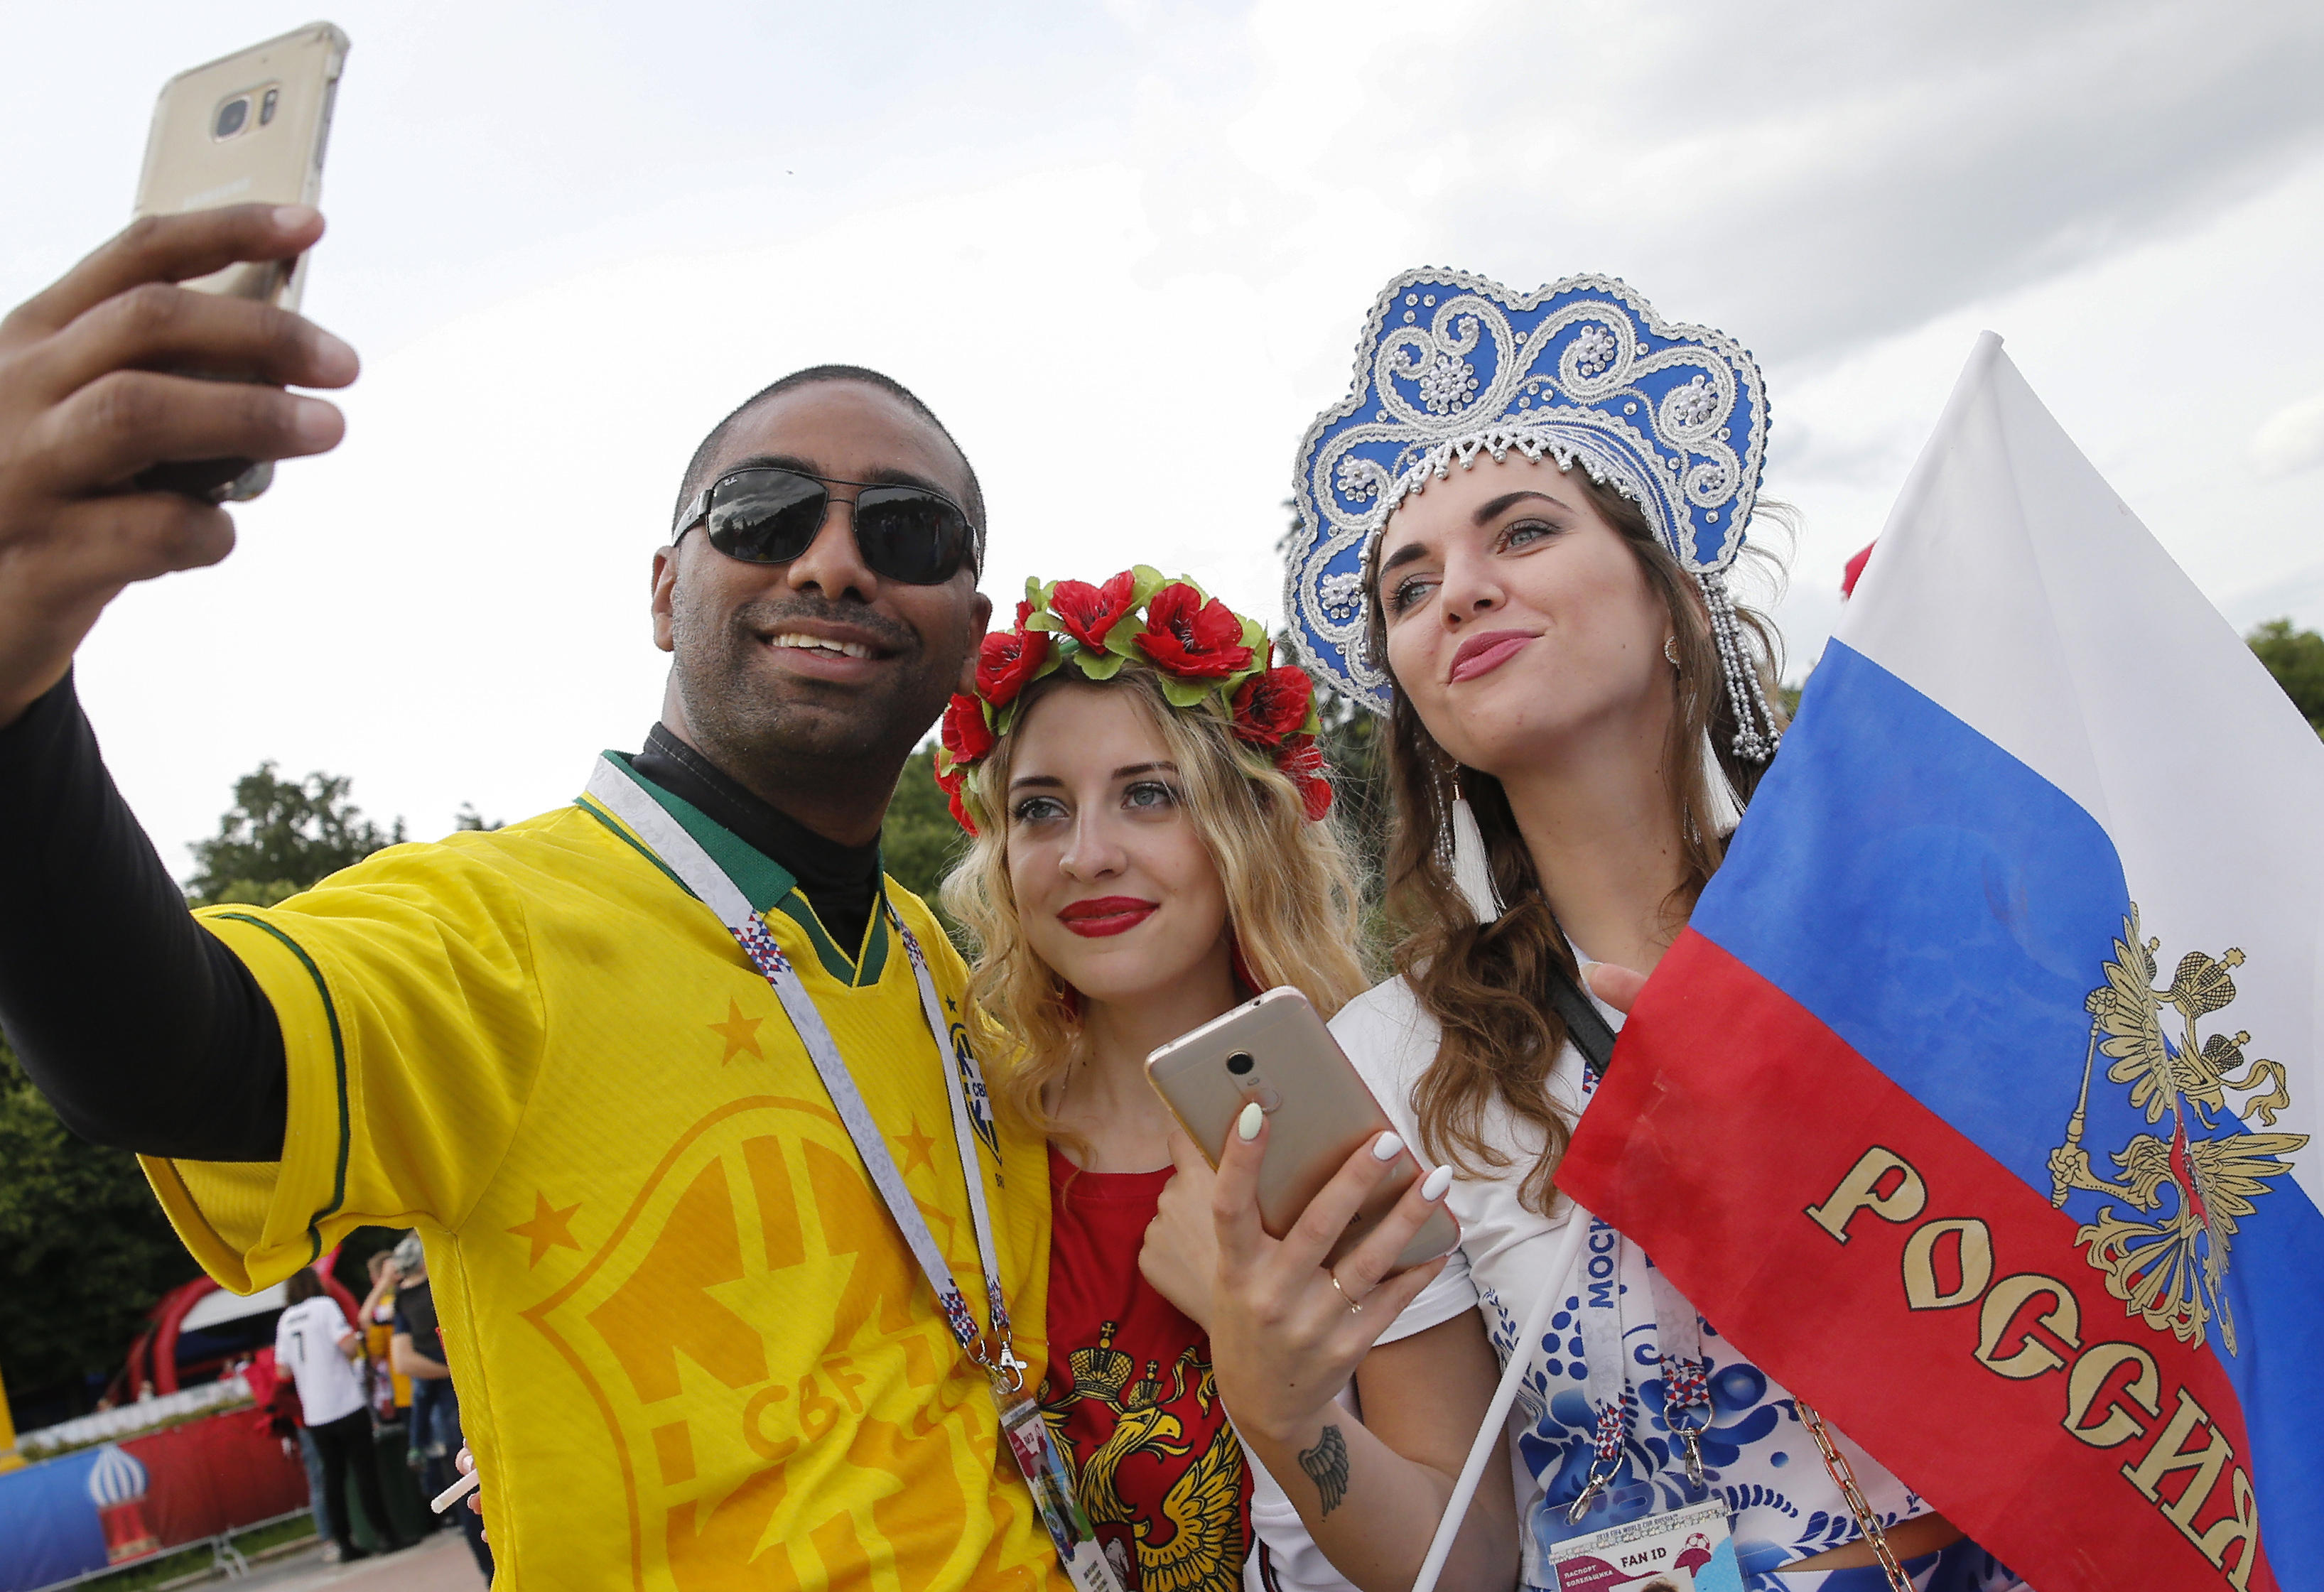 2018 FIFA World Cup Russias women encouraged to fall in love, procreate with visiting soccer fans pic